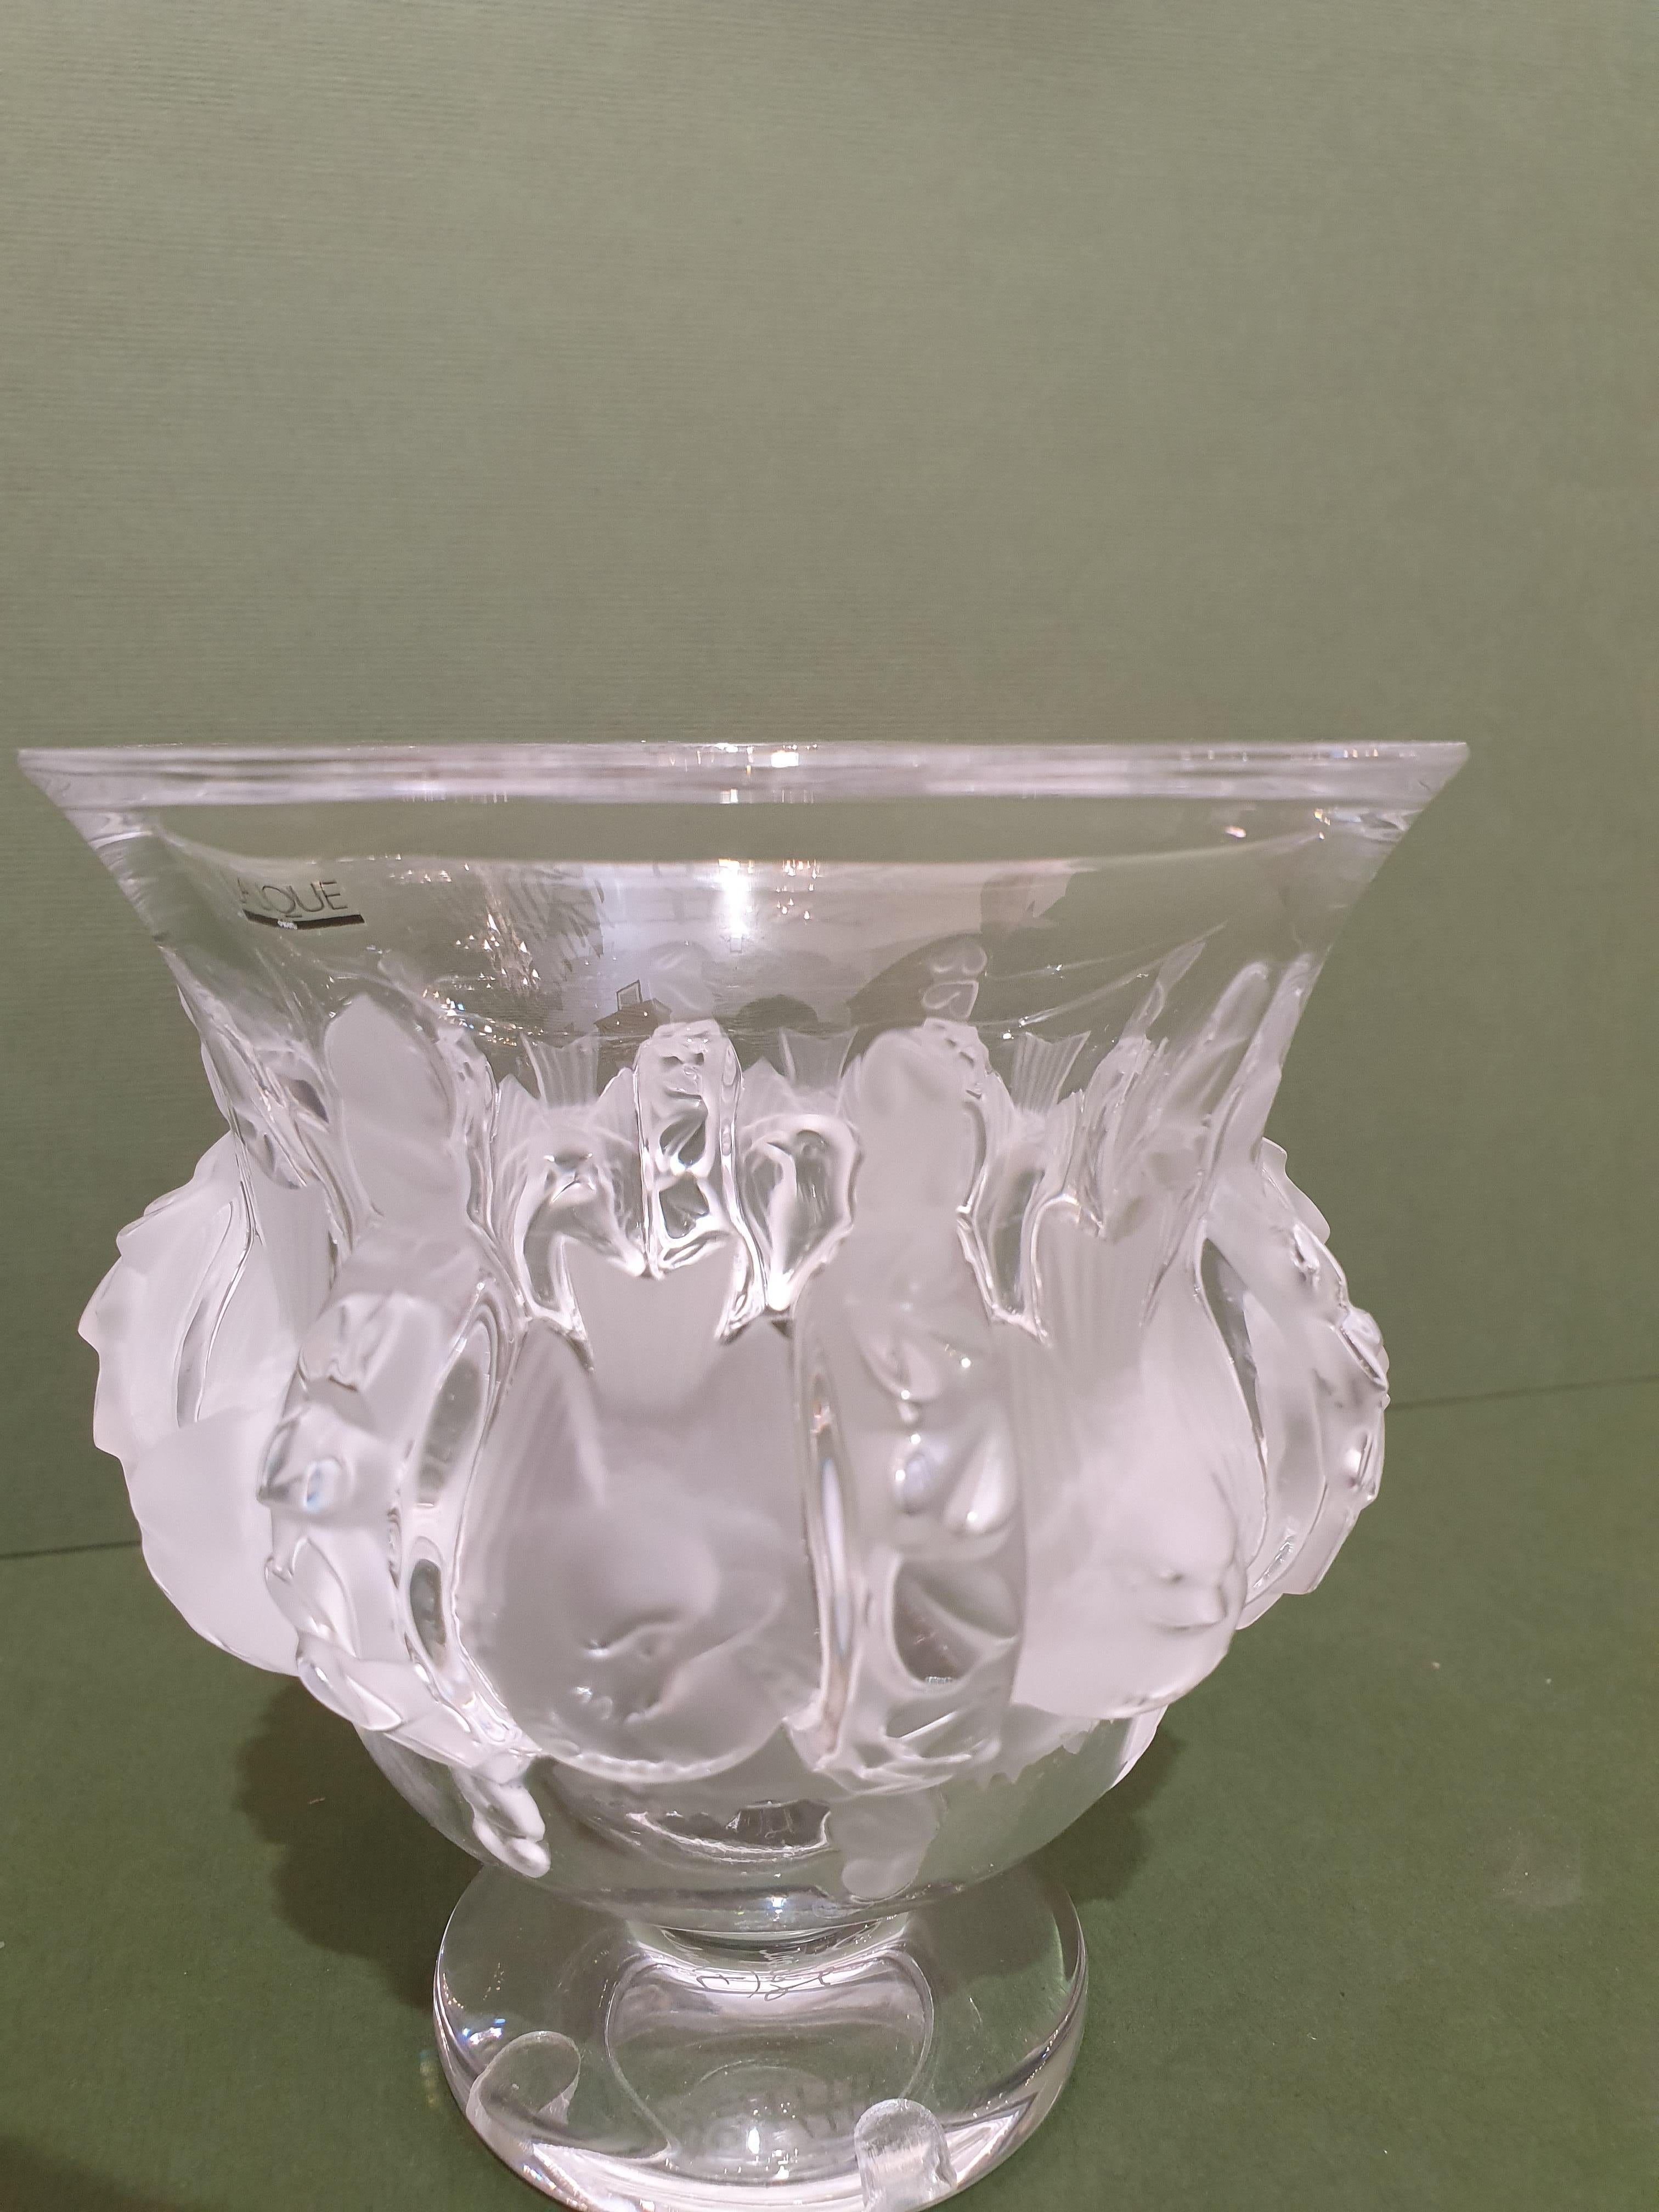 Designed in 1948 by Marc Lalique, this vase is decorated with carved birds in satin crystal. Through this vase, Lalique pays tribute to two themes dear to René Lalique, the Fauna and Flora. This piece takes us to a dreamlike state of nature,